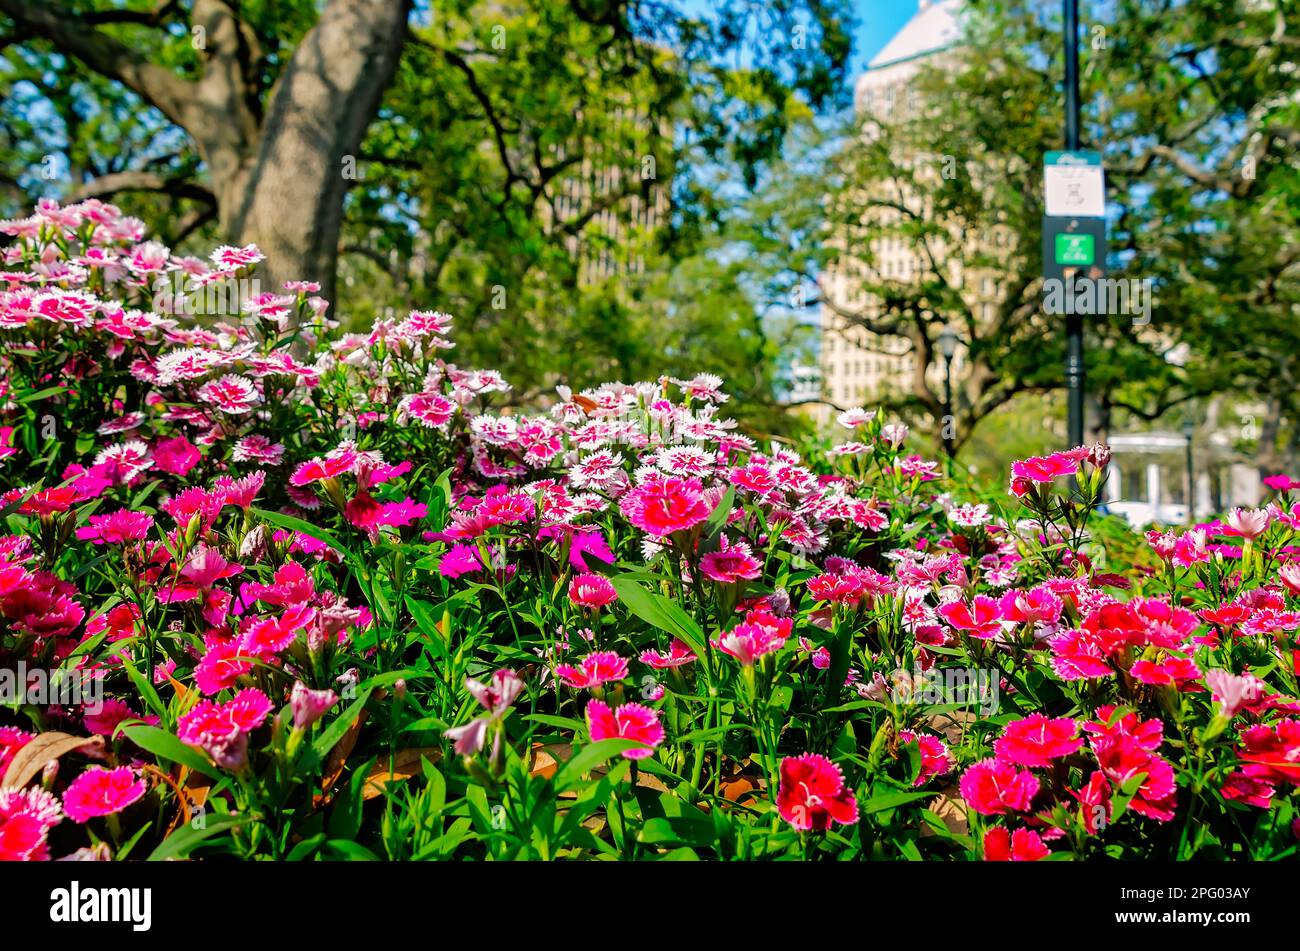 China pink (Dianthus chinensis), a type of dianthus, blooms in Bienville Square, March 8, 2023, in Mobile, Alabama. China pink is a perennial plant. Stock Photo